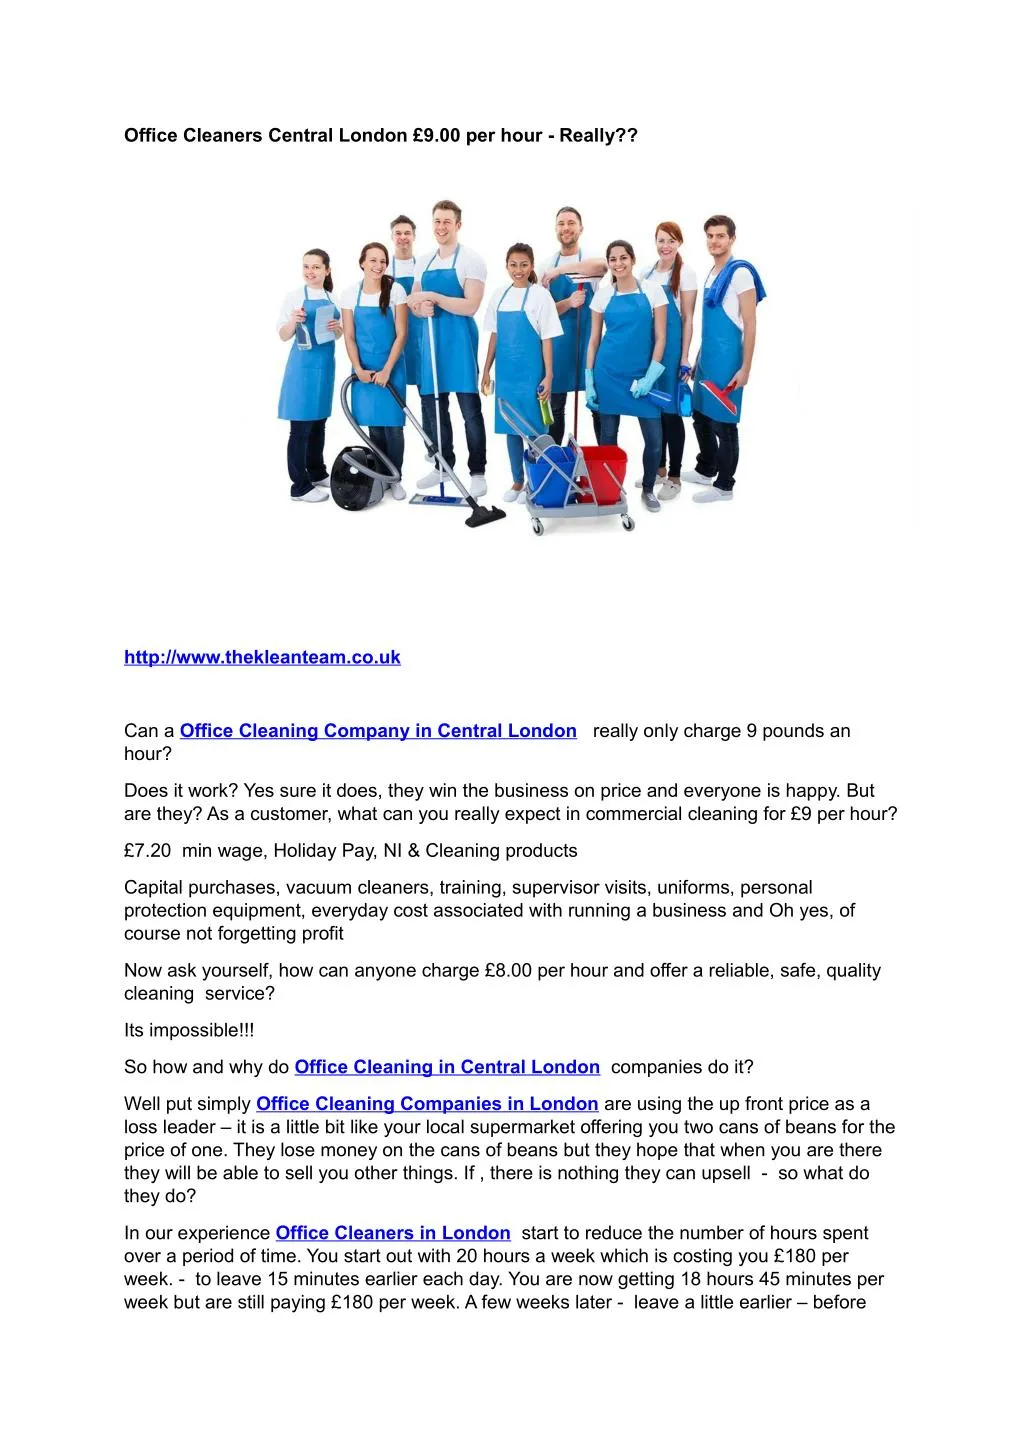 office cleaners central london 9 00 per hour